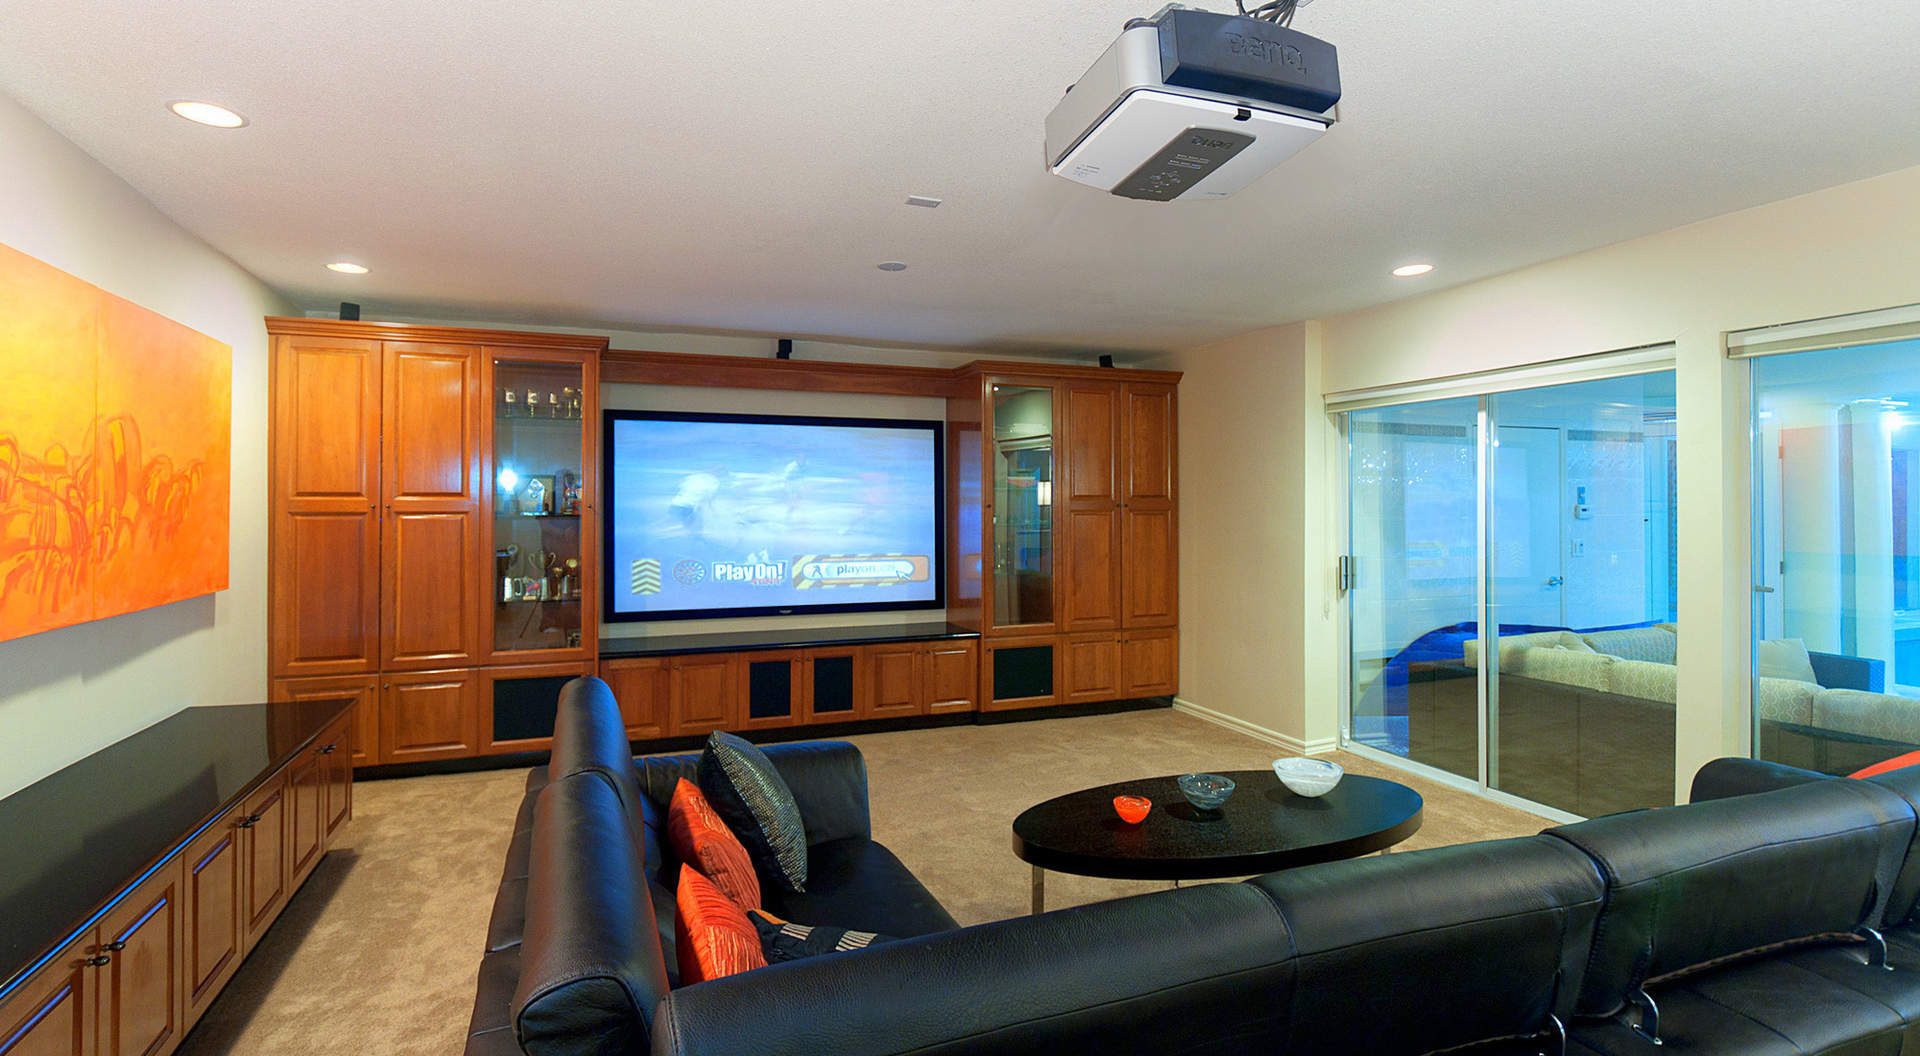 State-of-the-Art Home Theatre